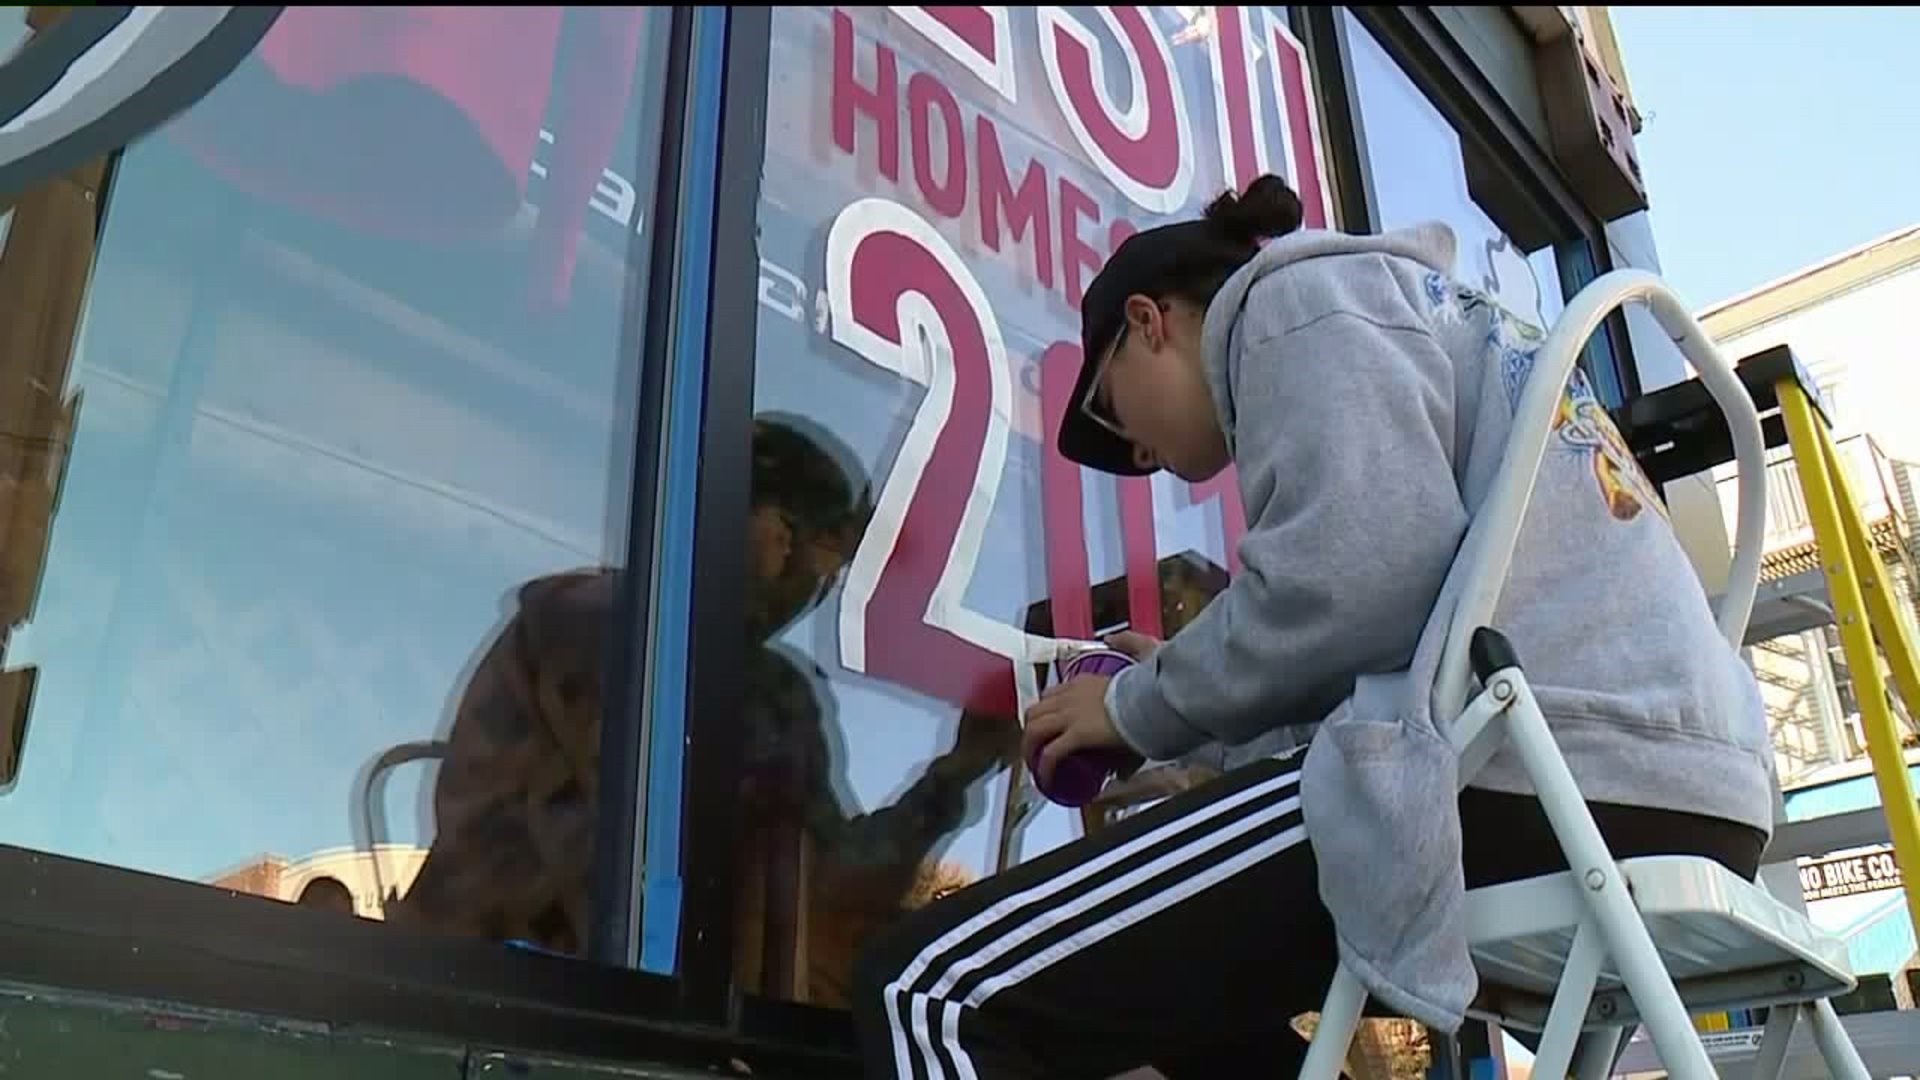 East Stroudsburg University Graphic Design Students Paint Storefront Windows for Homecoming